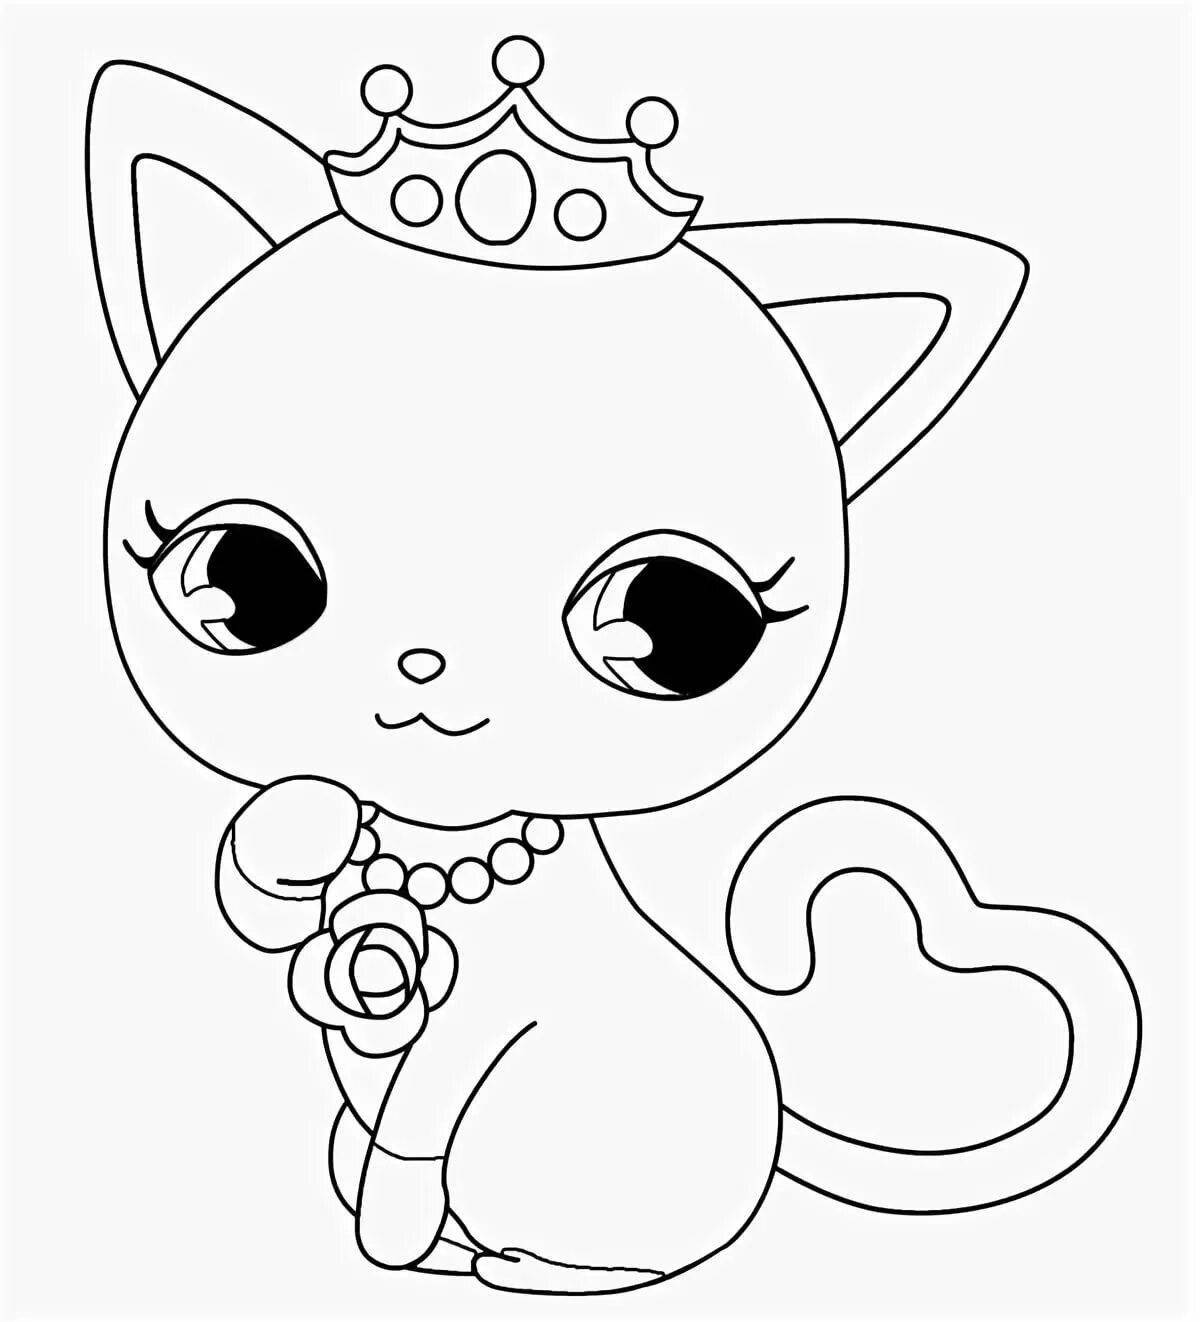 Coloring page affectionate kitten chi